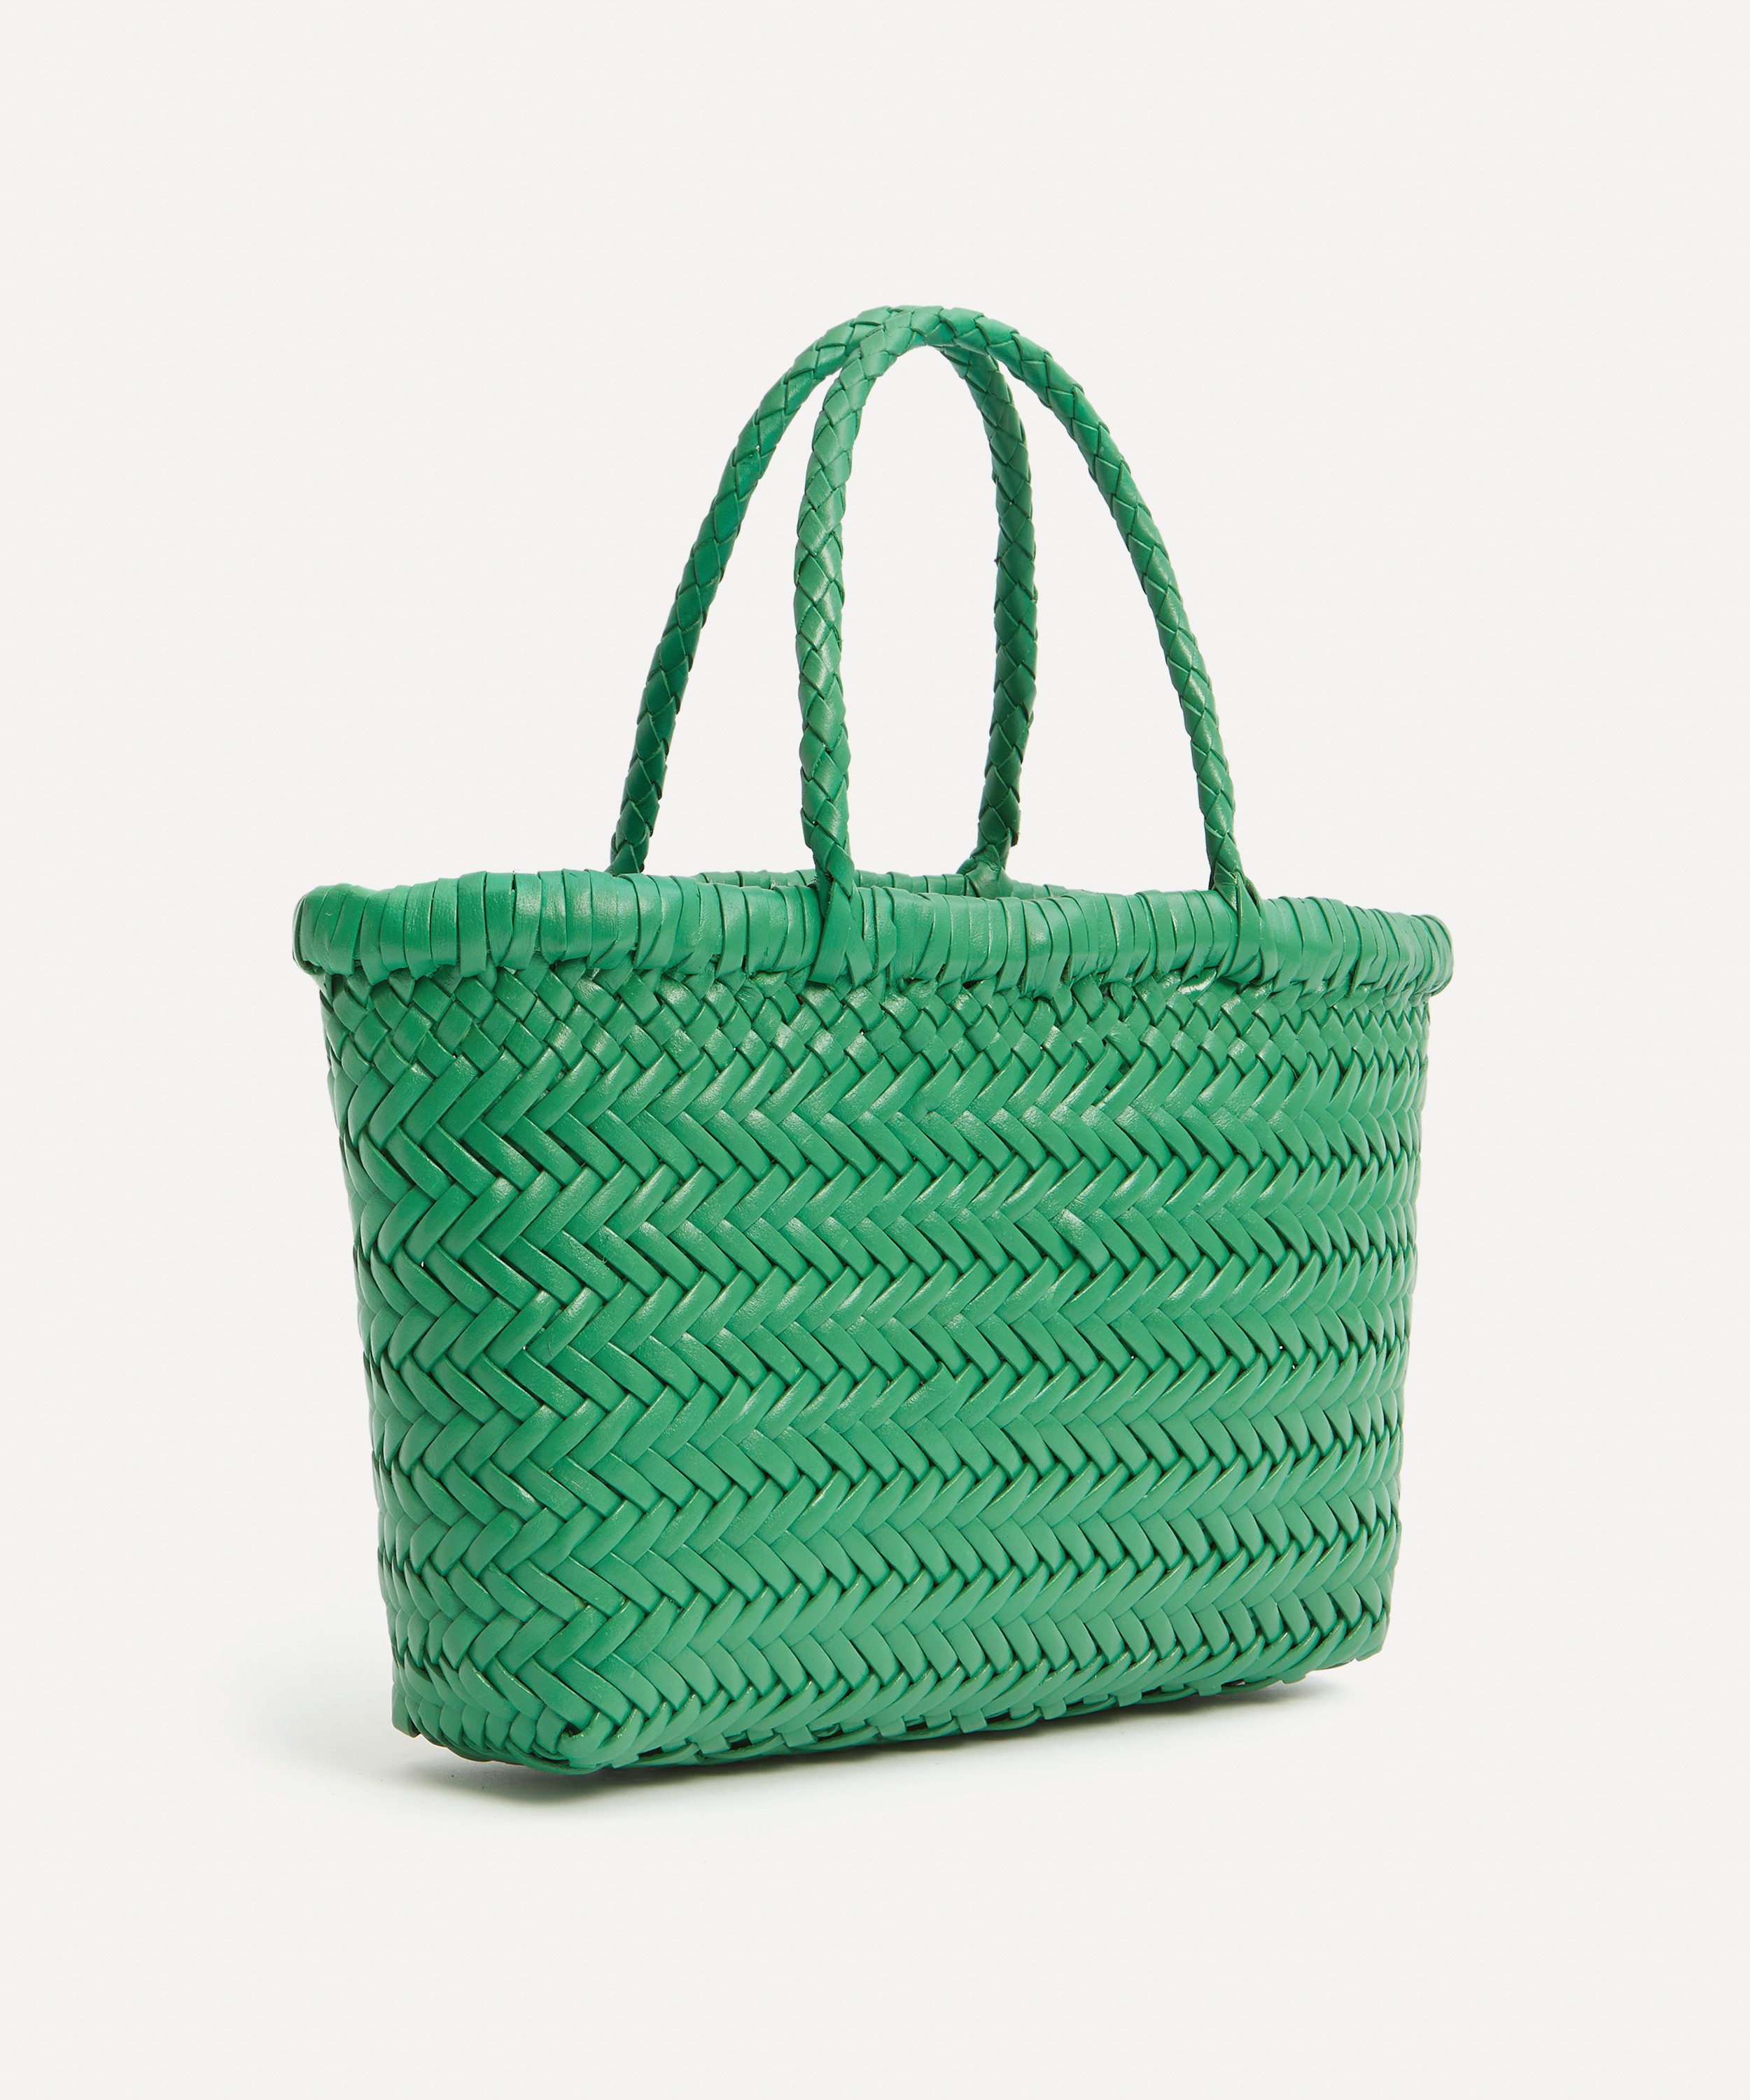 DRAGON DIFFUSION Nantucket large woven leather tote